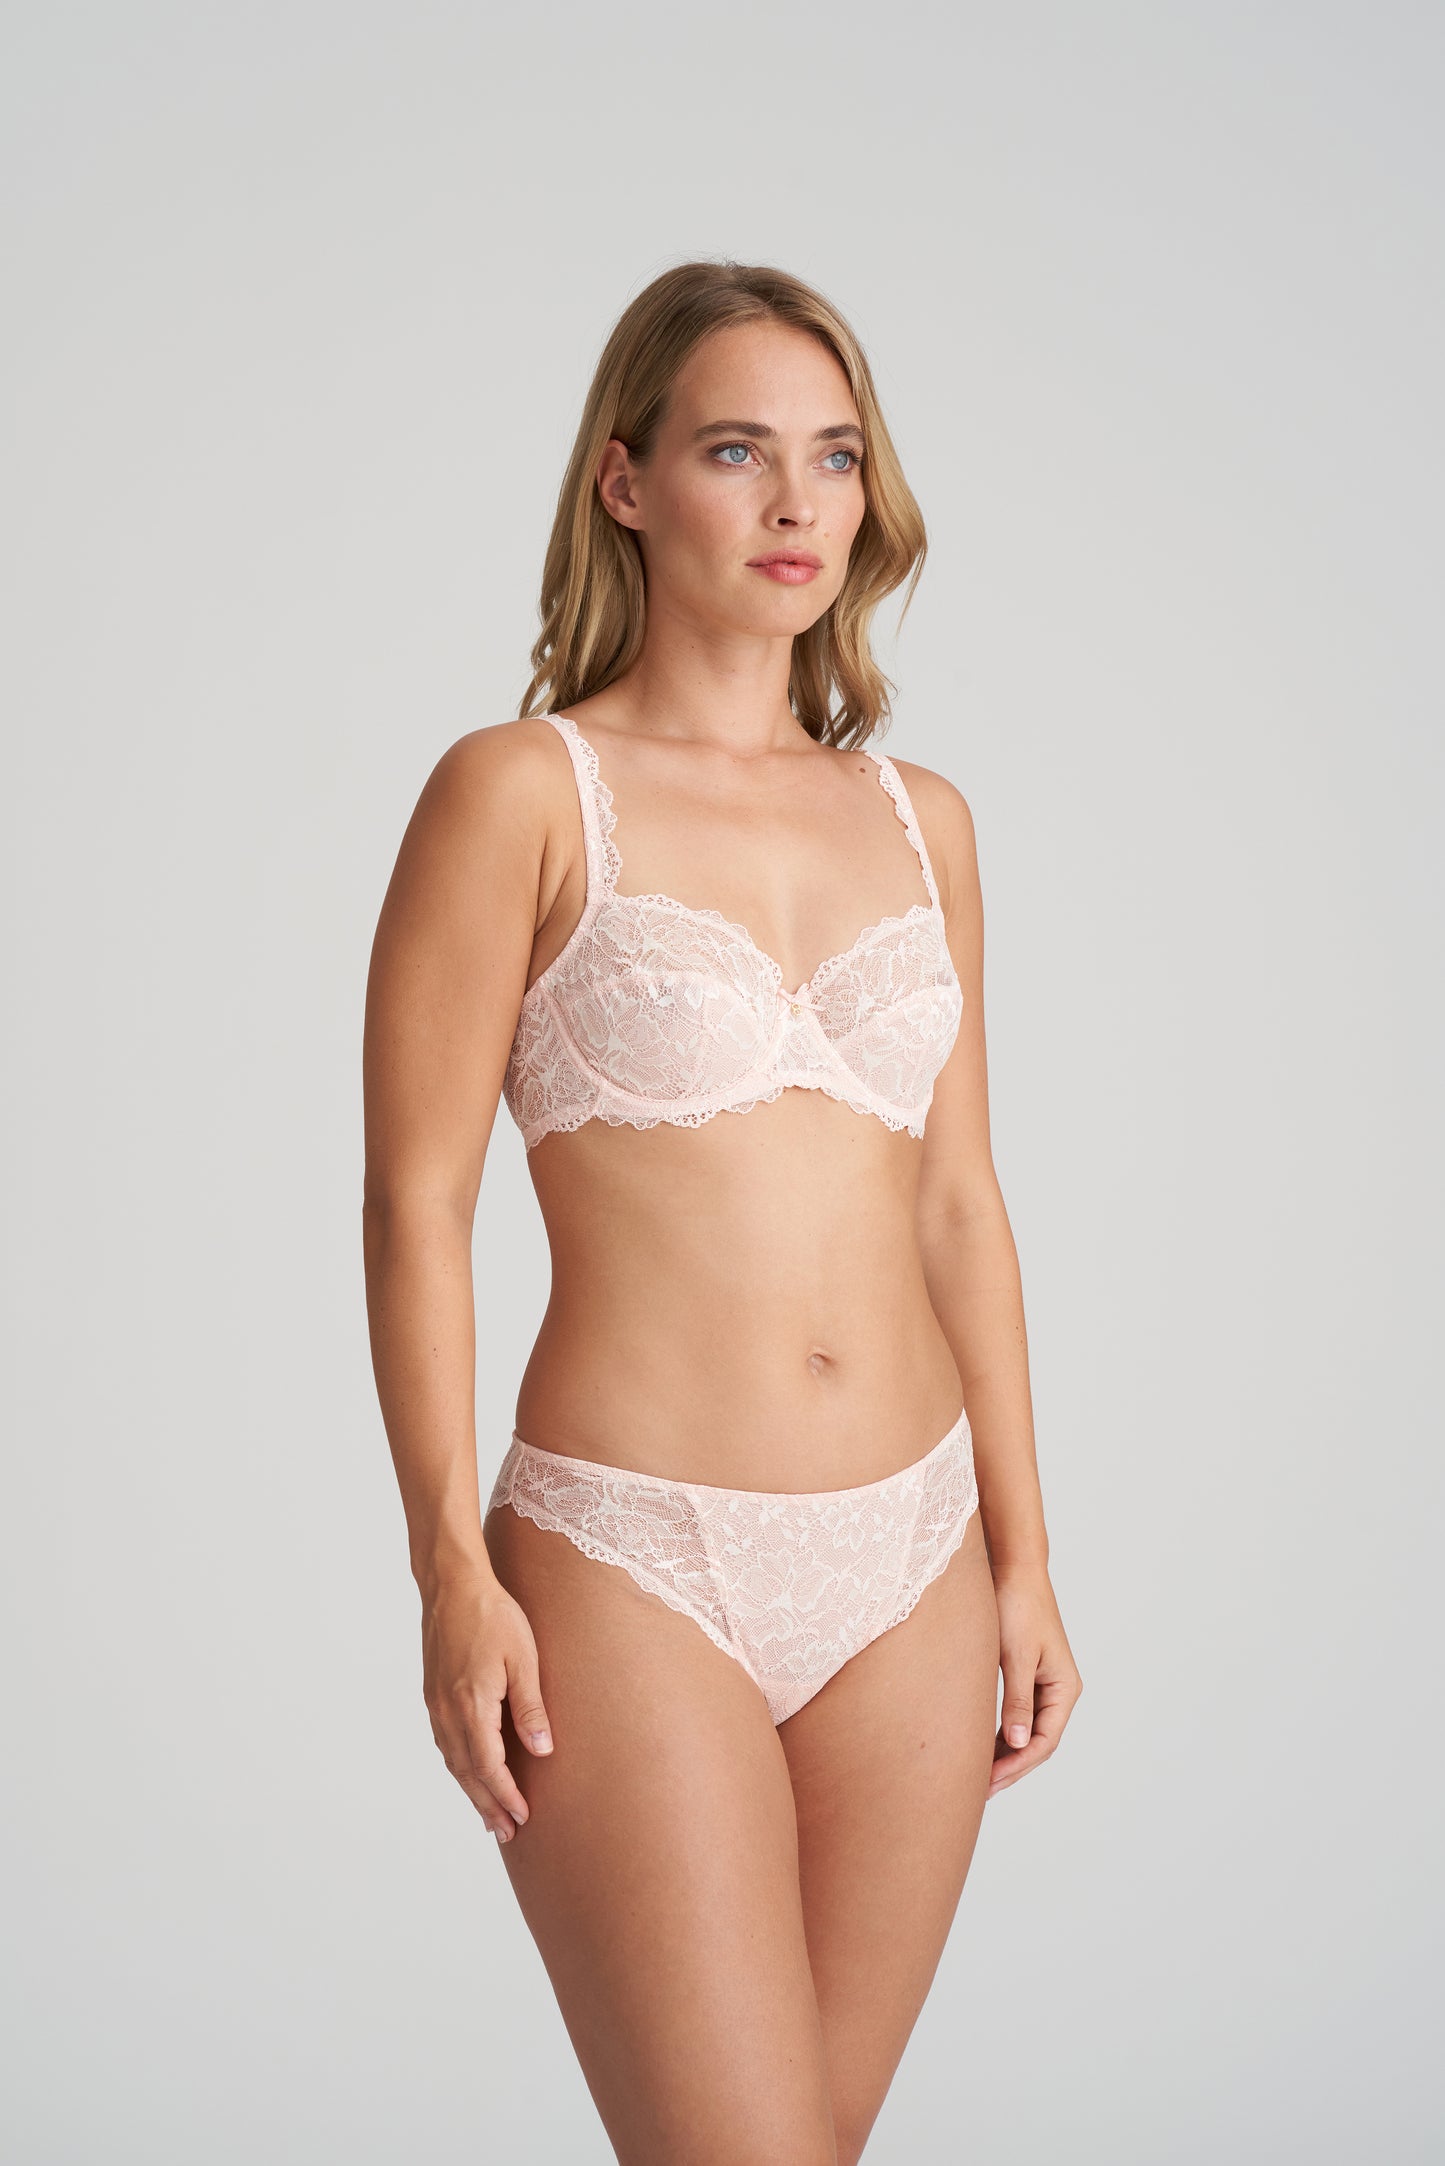 Marie Jo Manyla volle cup bh pearly pink